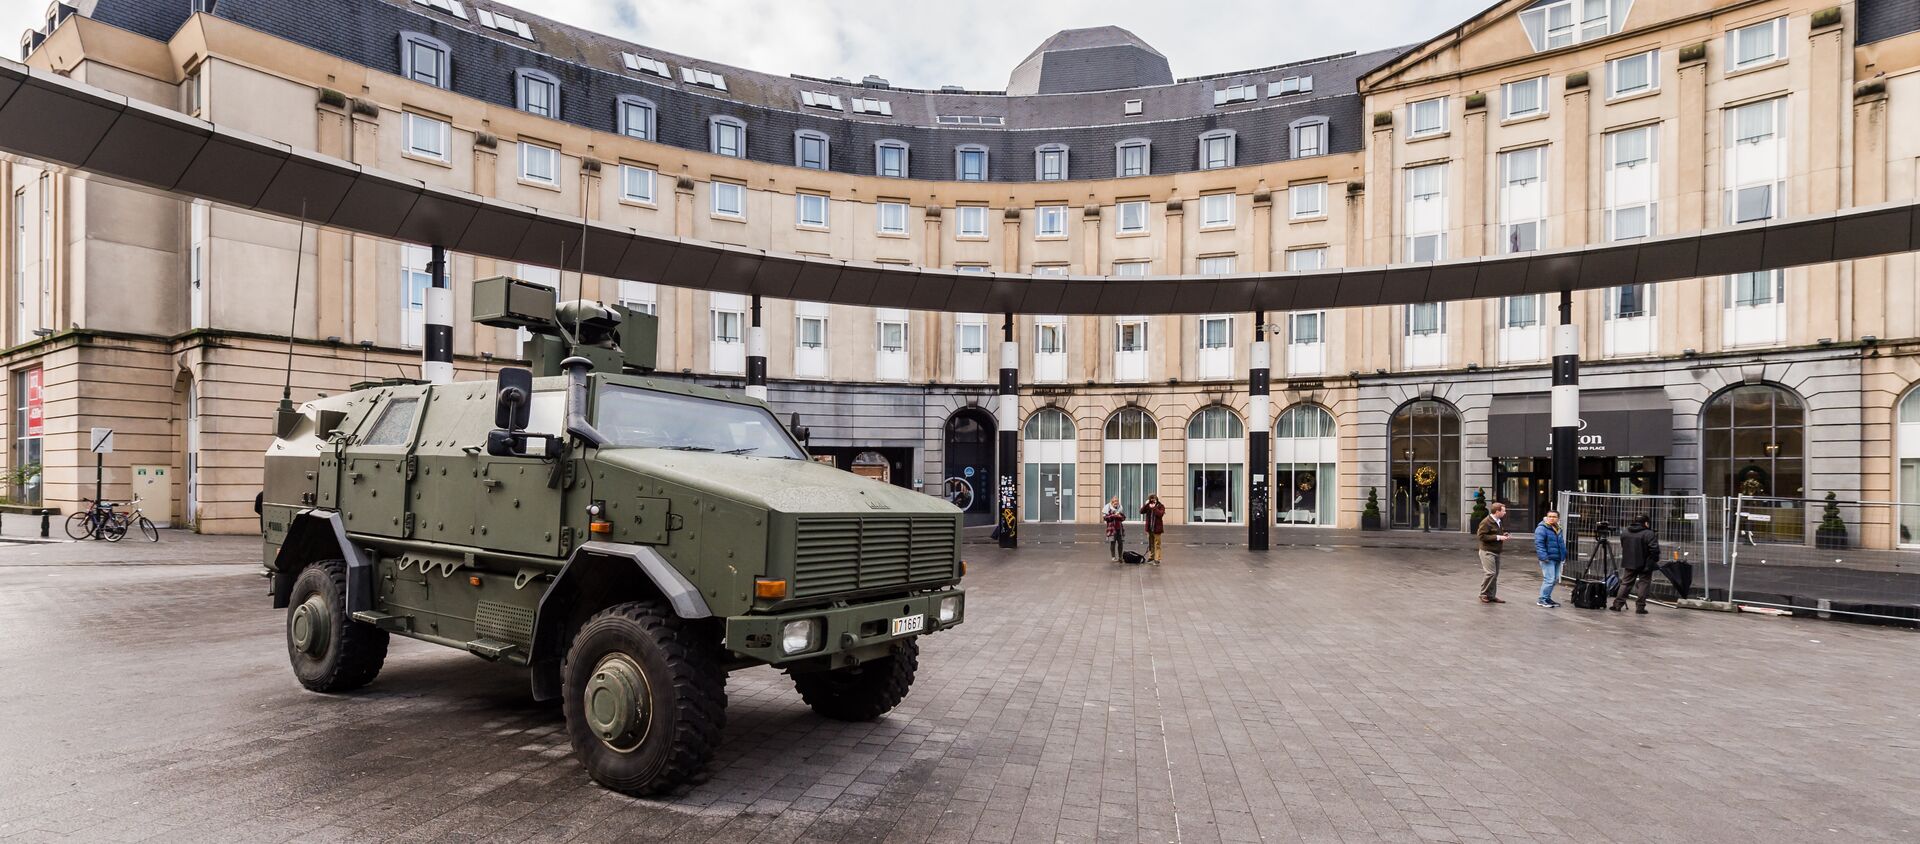 A Belgian Army vehicle is parked on the almost deserted square in front of the main train station in the center of Brussels on Sunday, Nov. 22, 2015. - سبوتنيك عربي, 1920, 21.06.2017